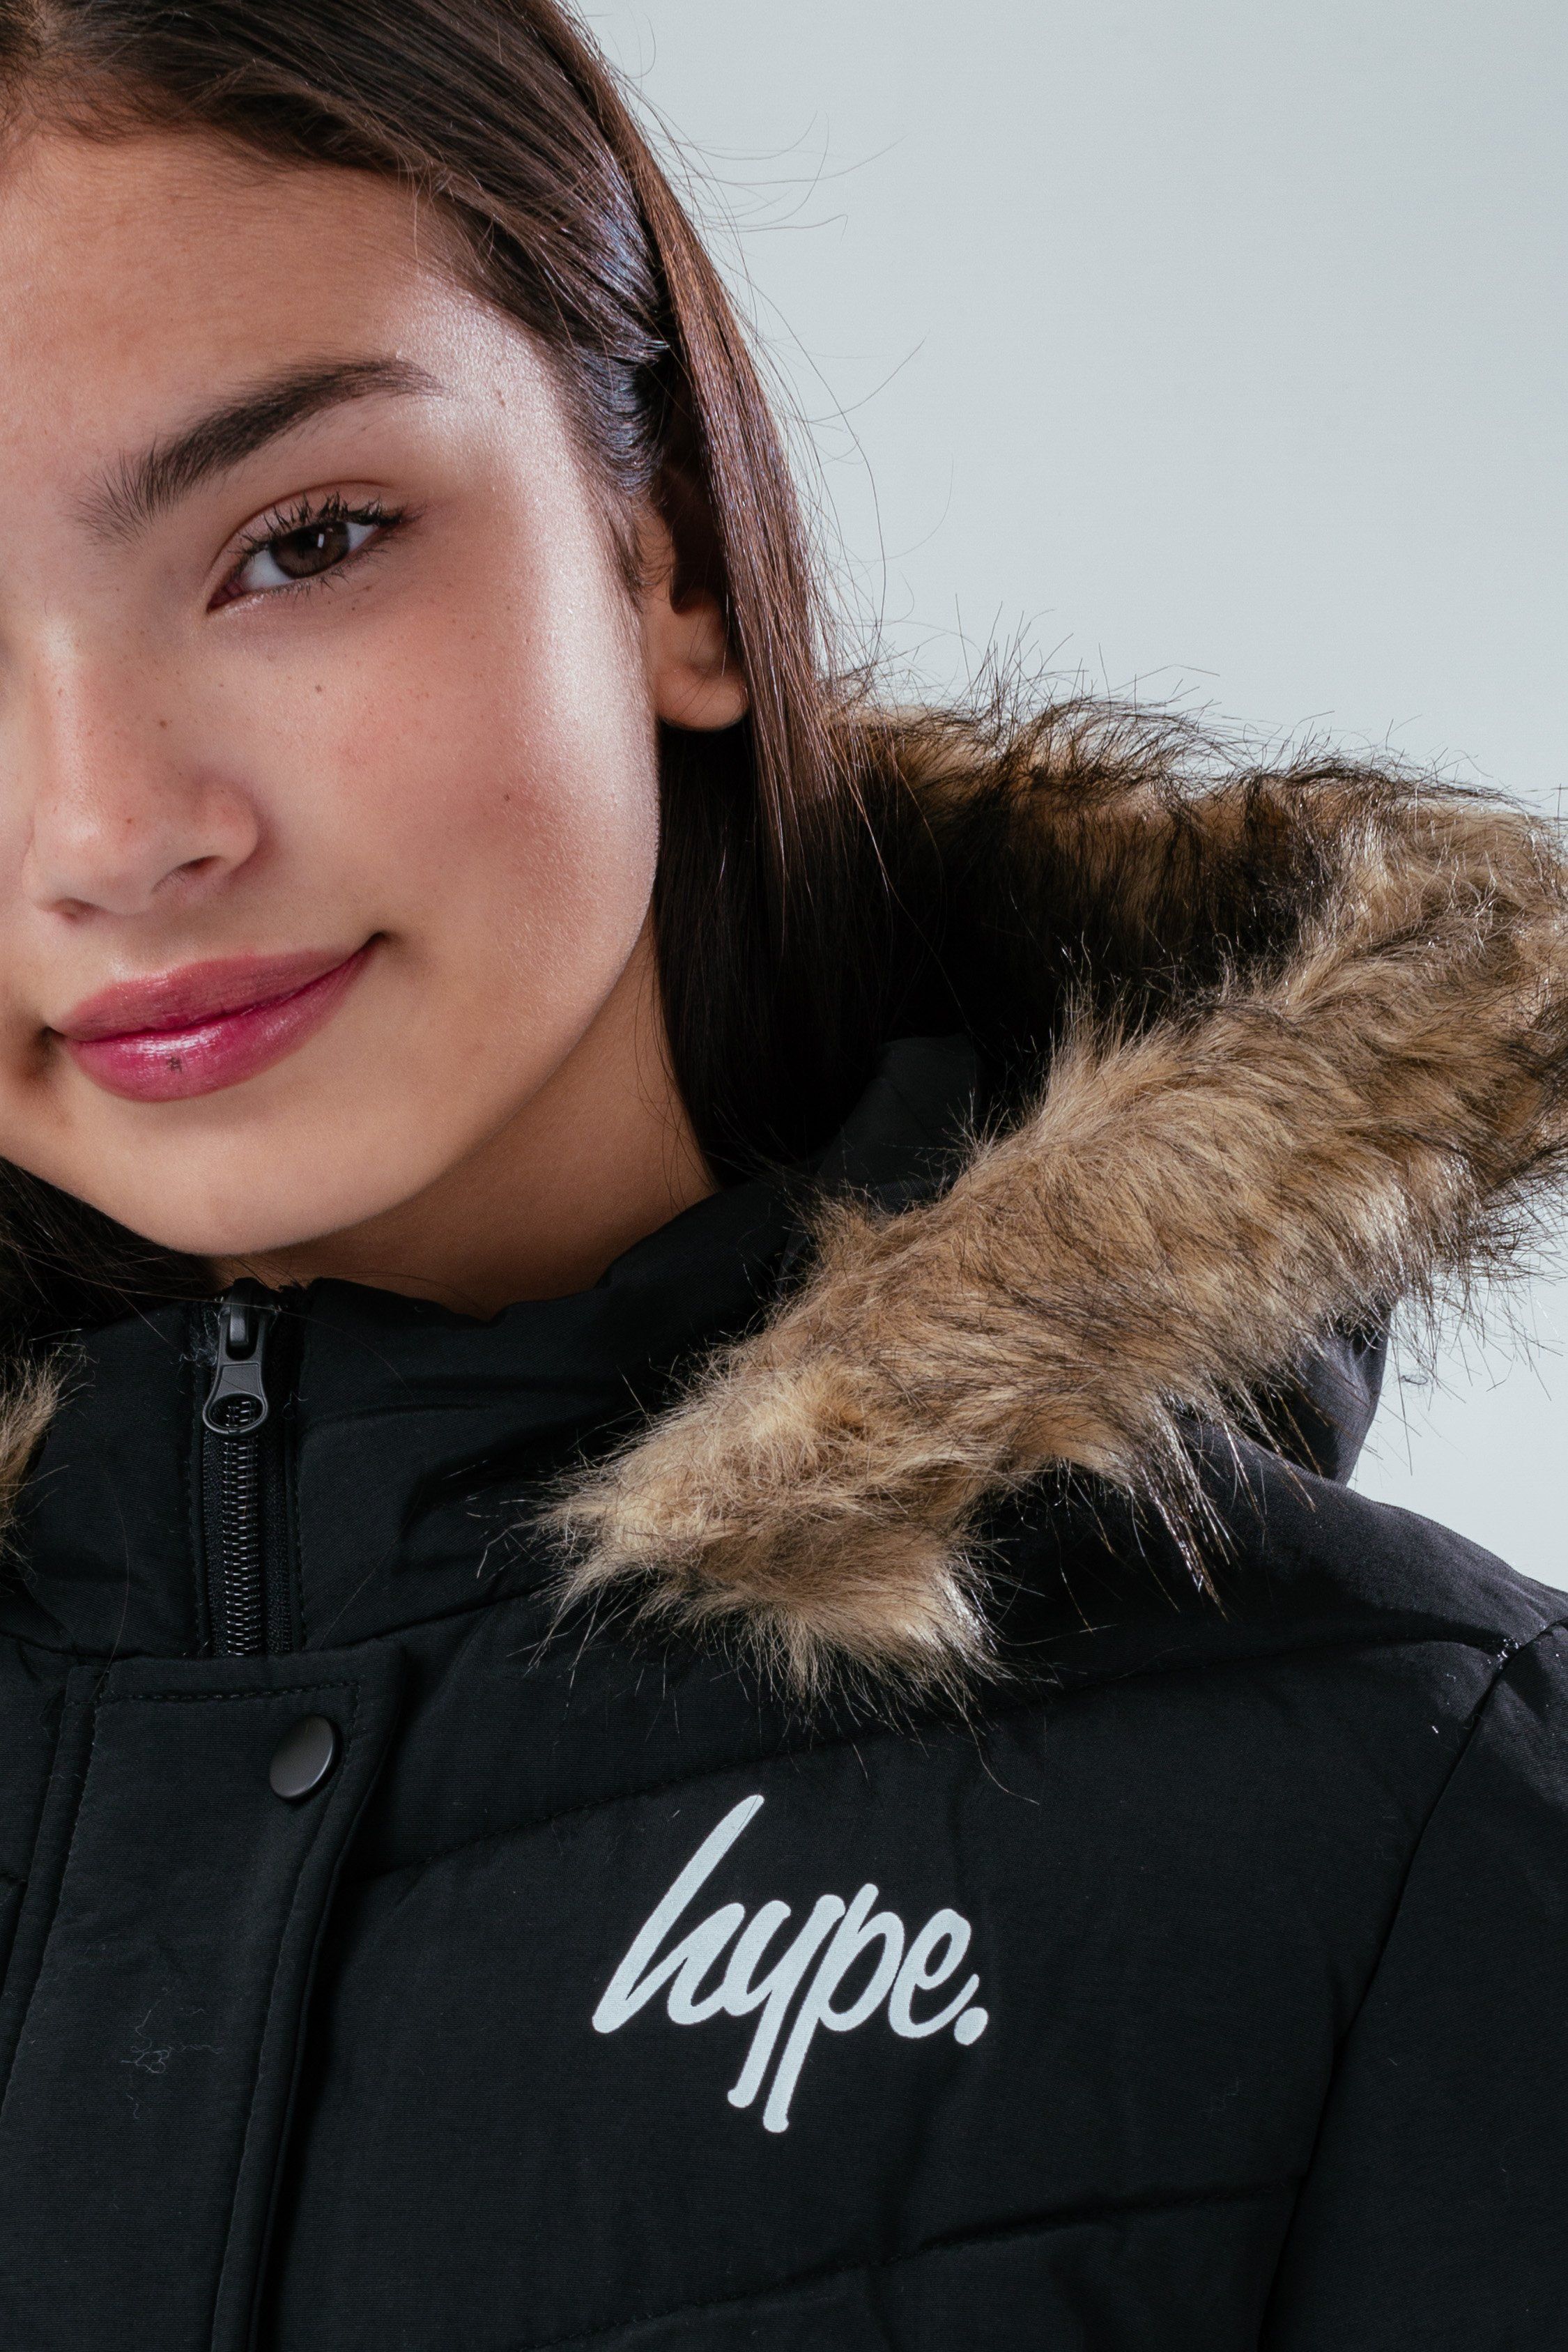 Hype Girls Black Fitted Parka Jacket